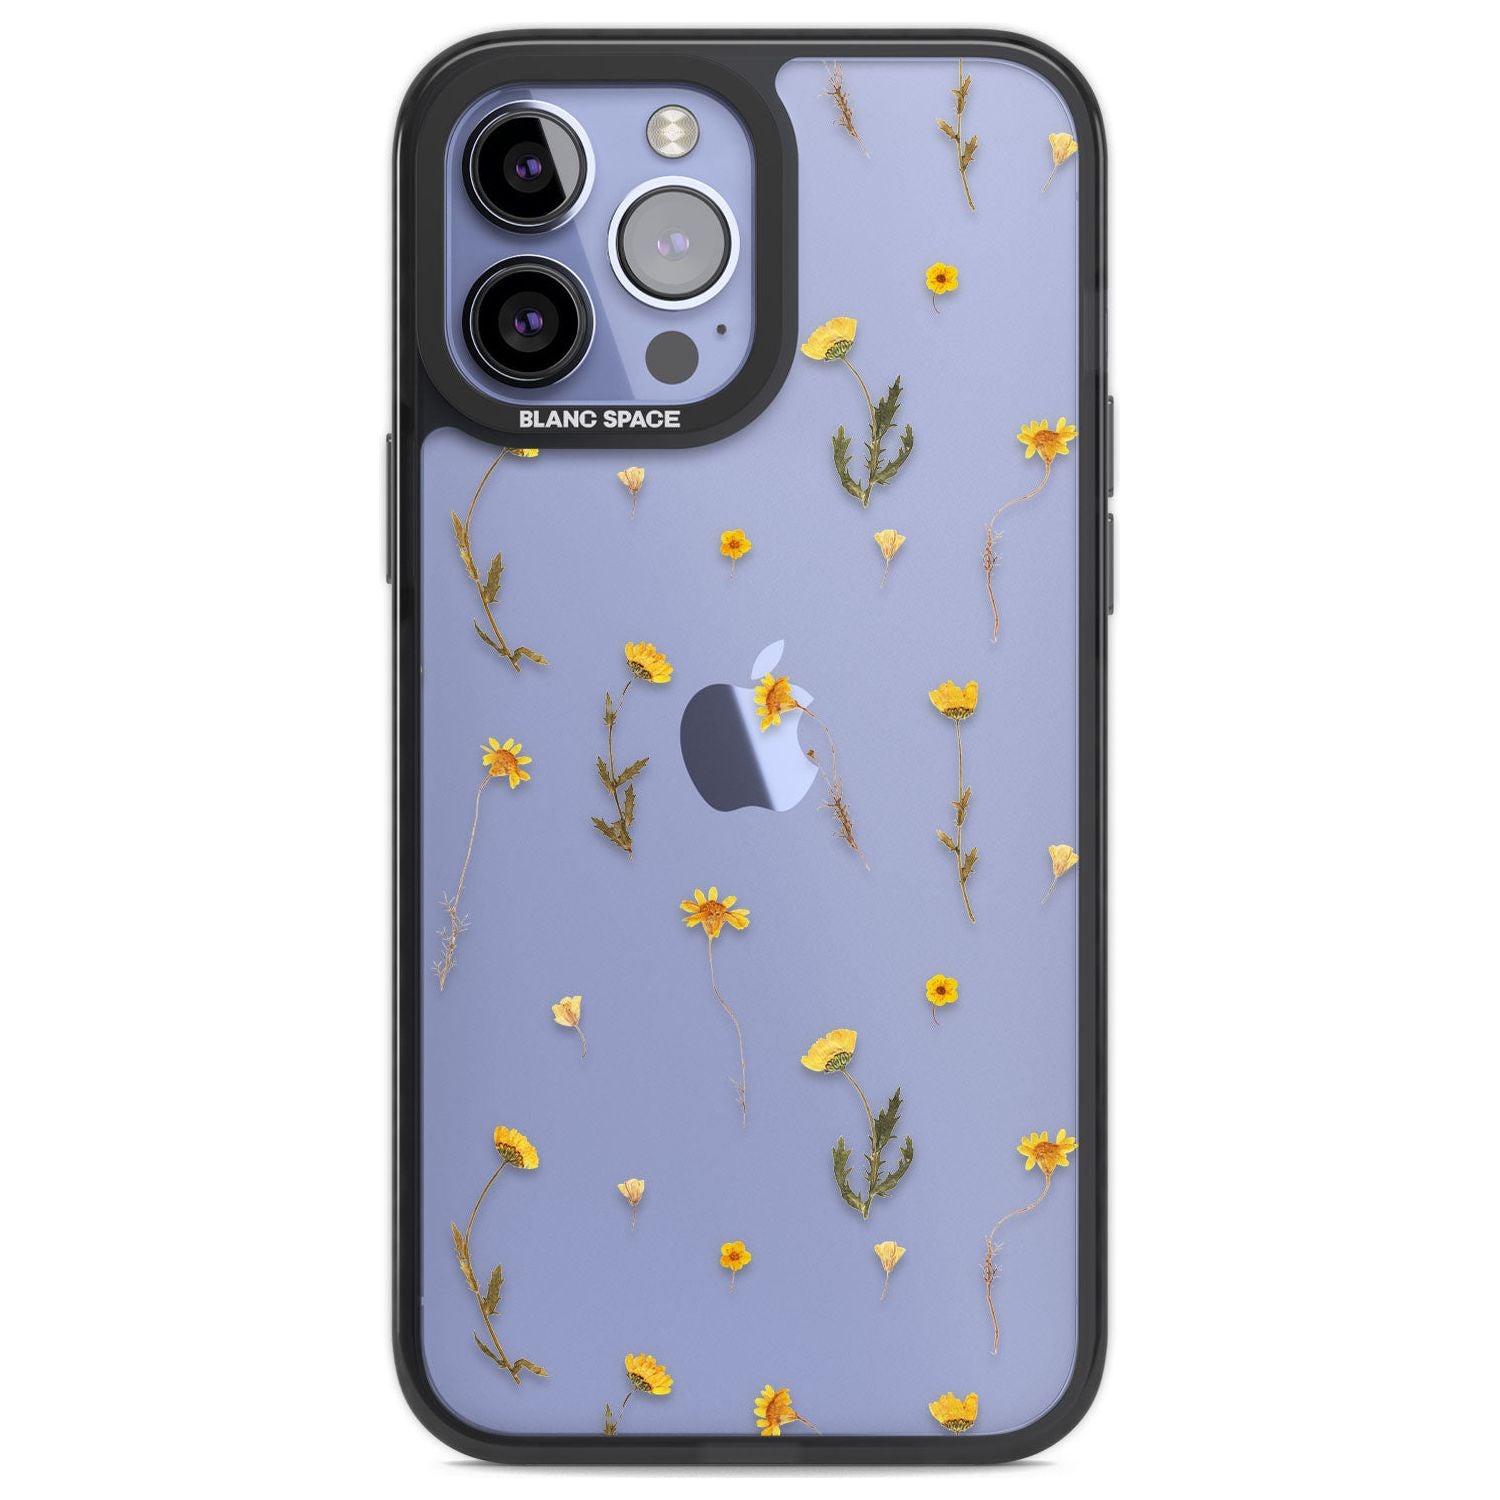 Mixed Yellow Flowers - Dried Flower-Inspired Phone Case iPhone 13 Pro Max / Black Impact Case,iPhone 14 Pro Max / Black Impact Case Blanc Space